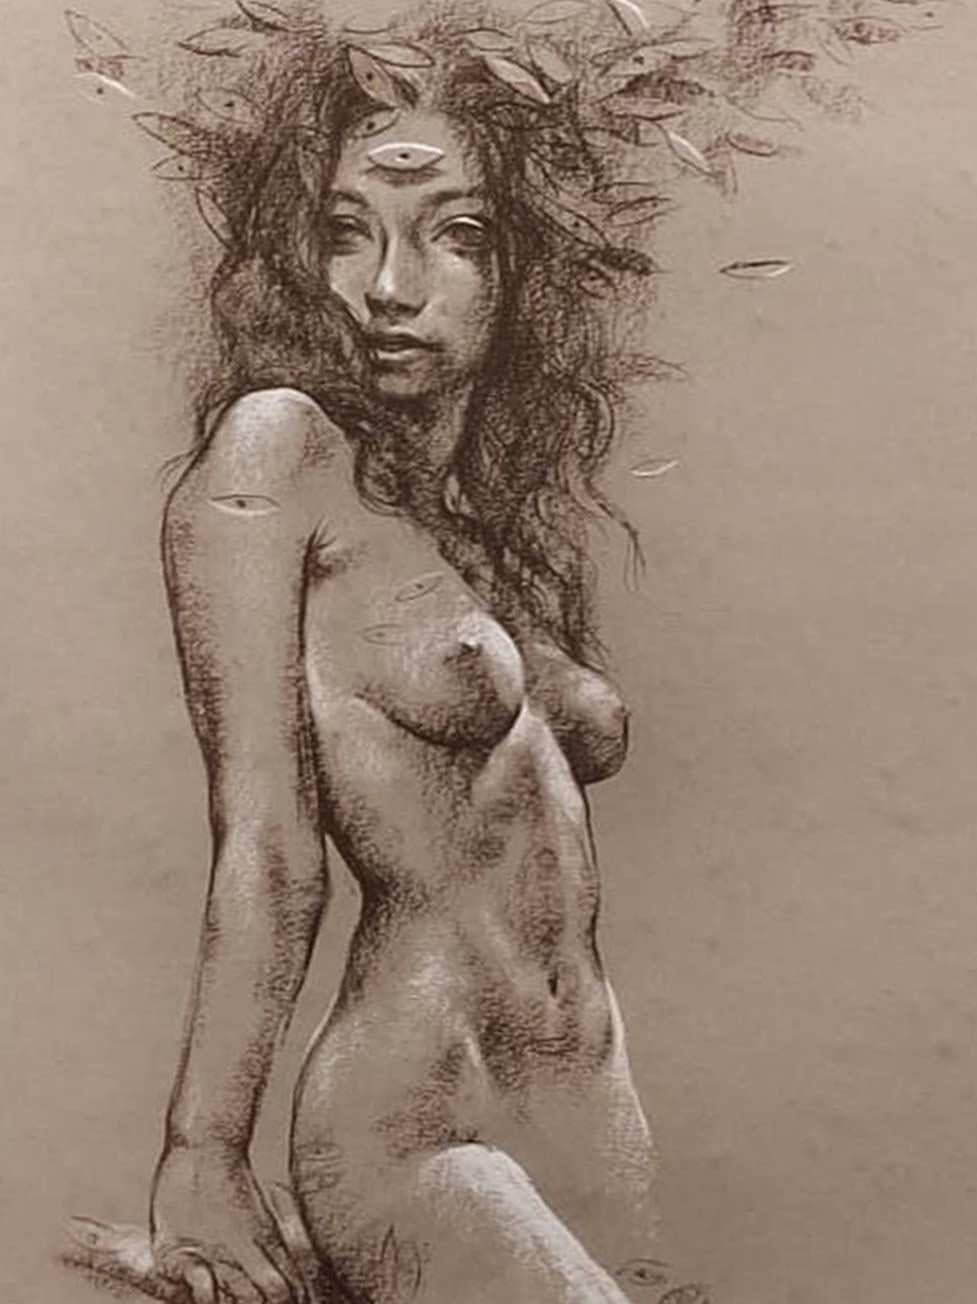 Nude Woman, Conte on Paper, Brown, Black, Contemporary Indian Artist 